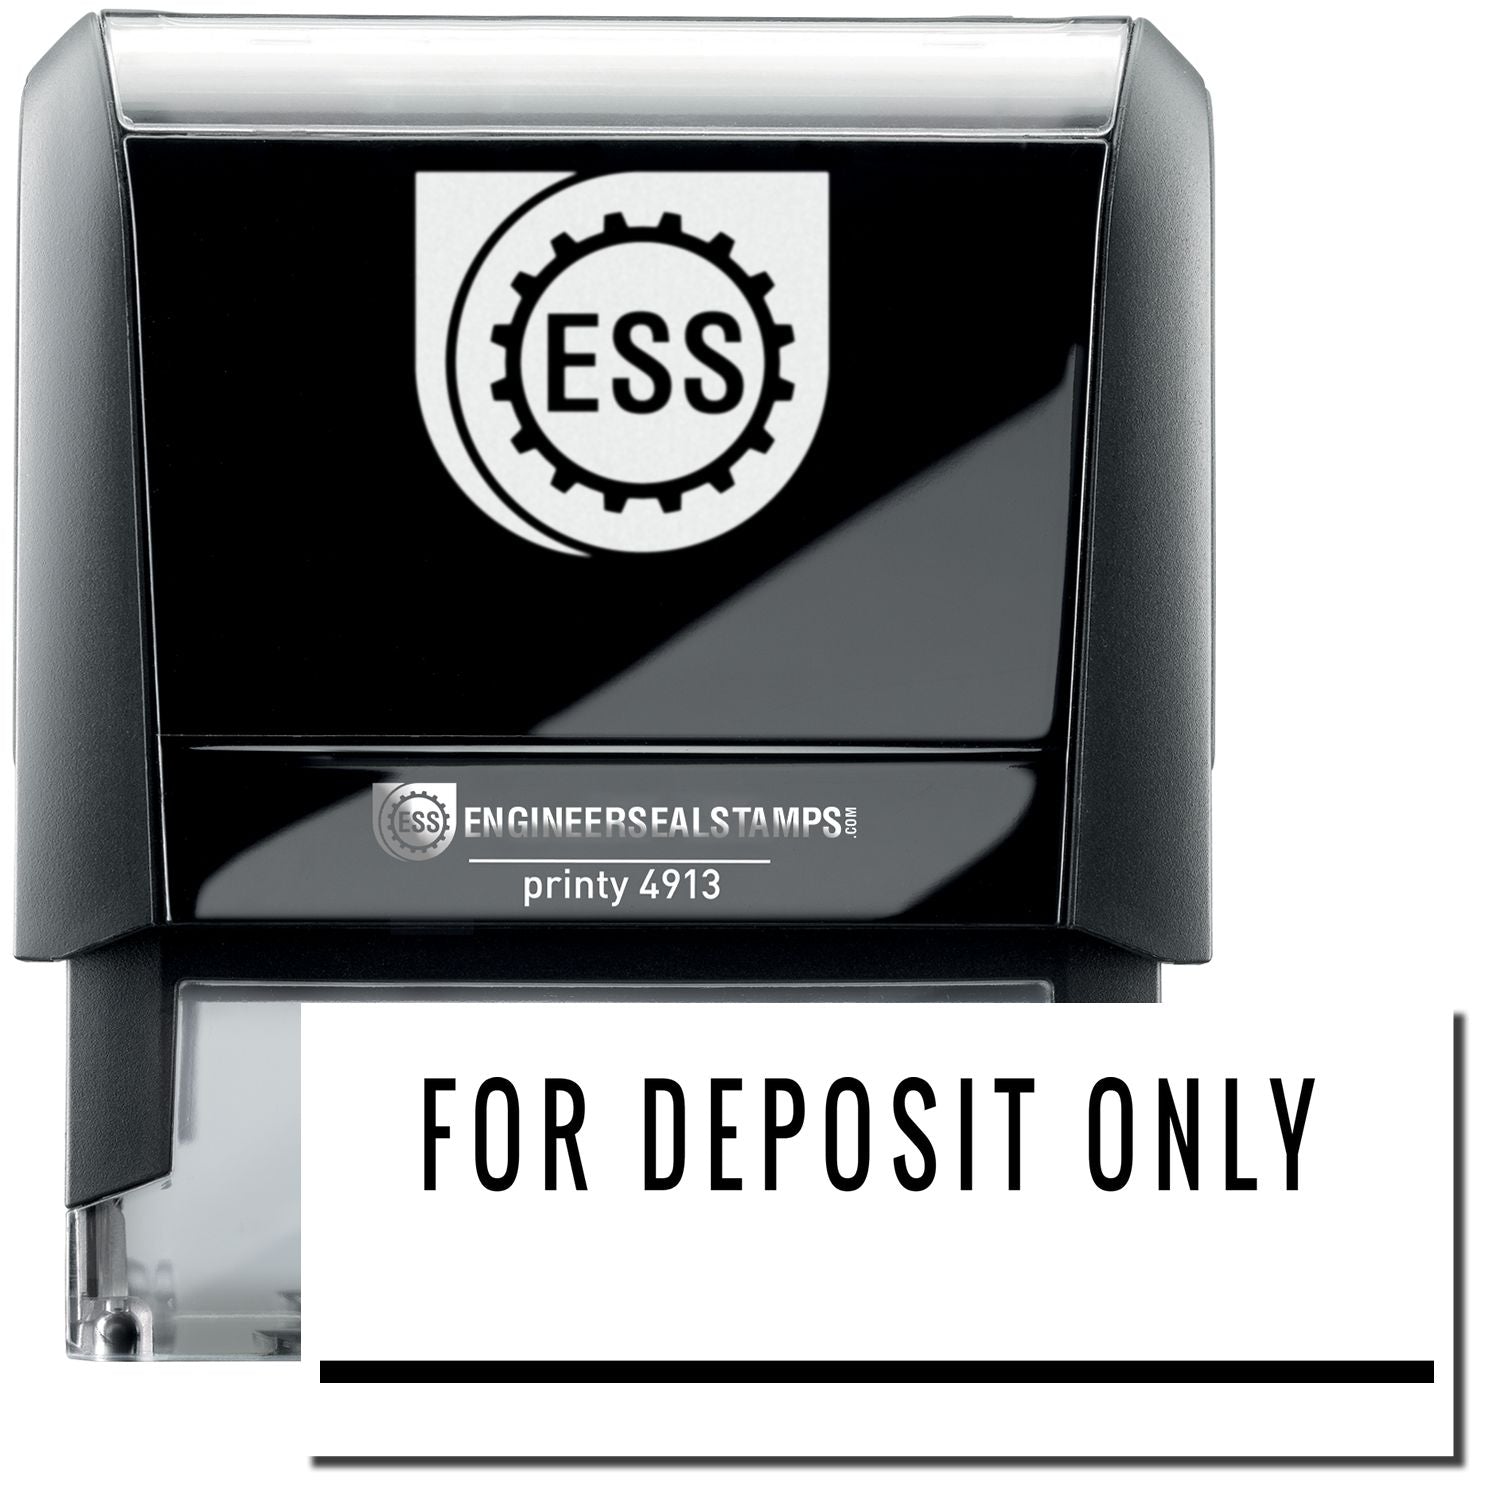 A self-inking stamp with a stamped image showing how the text "FOR DEPOSIT ONLY" in a large font with a line underneath the text is displayed after stamping.